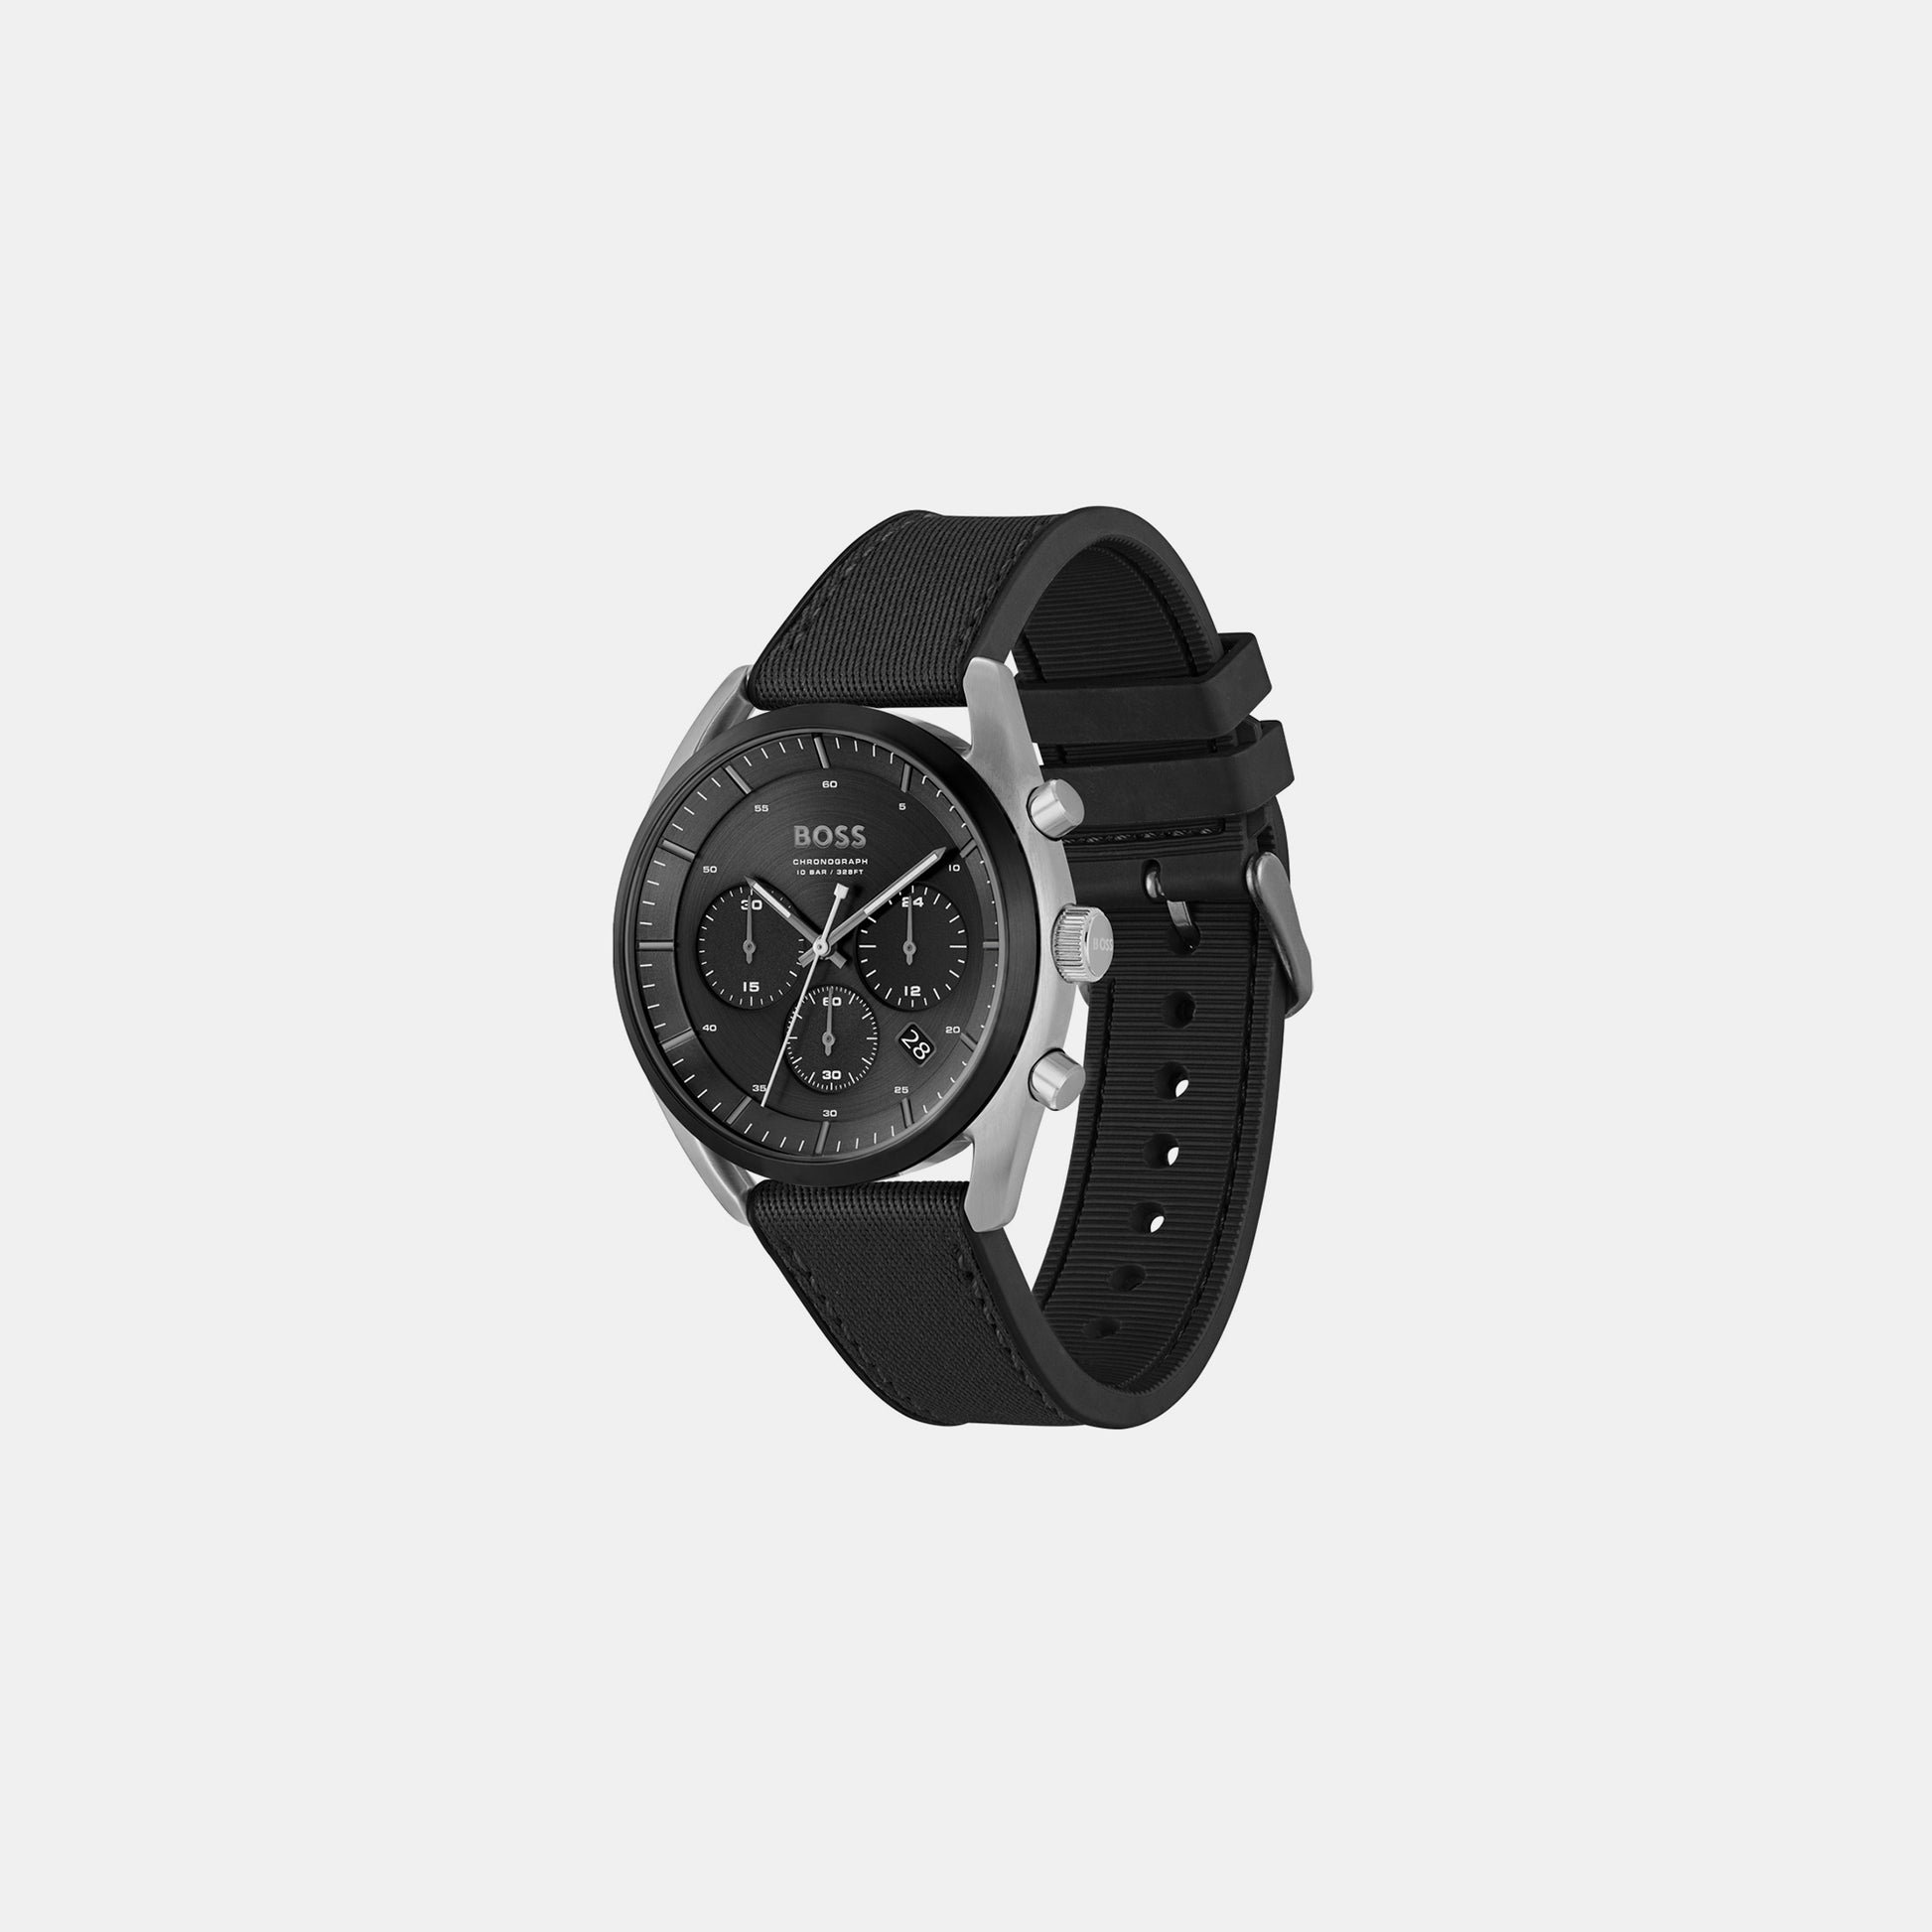 Top Male Black Chronograph Silicon Watch 1514091 – Just In Time | Solaruhren